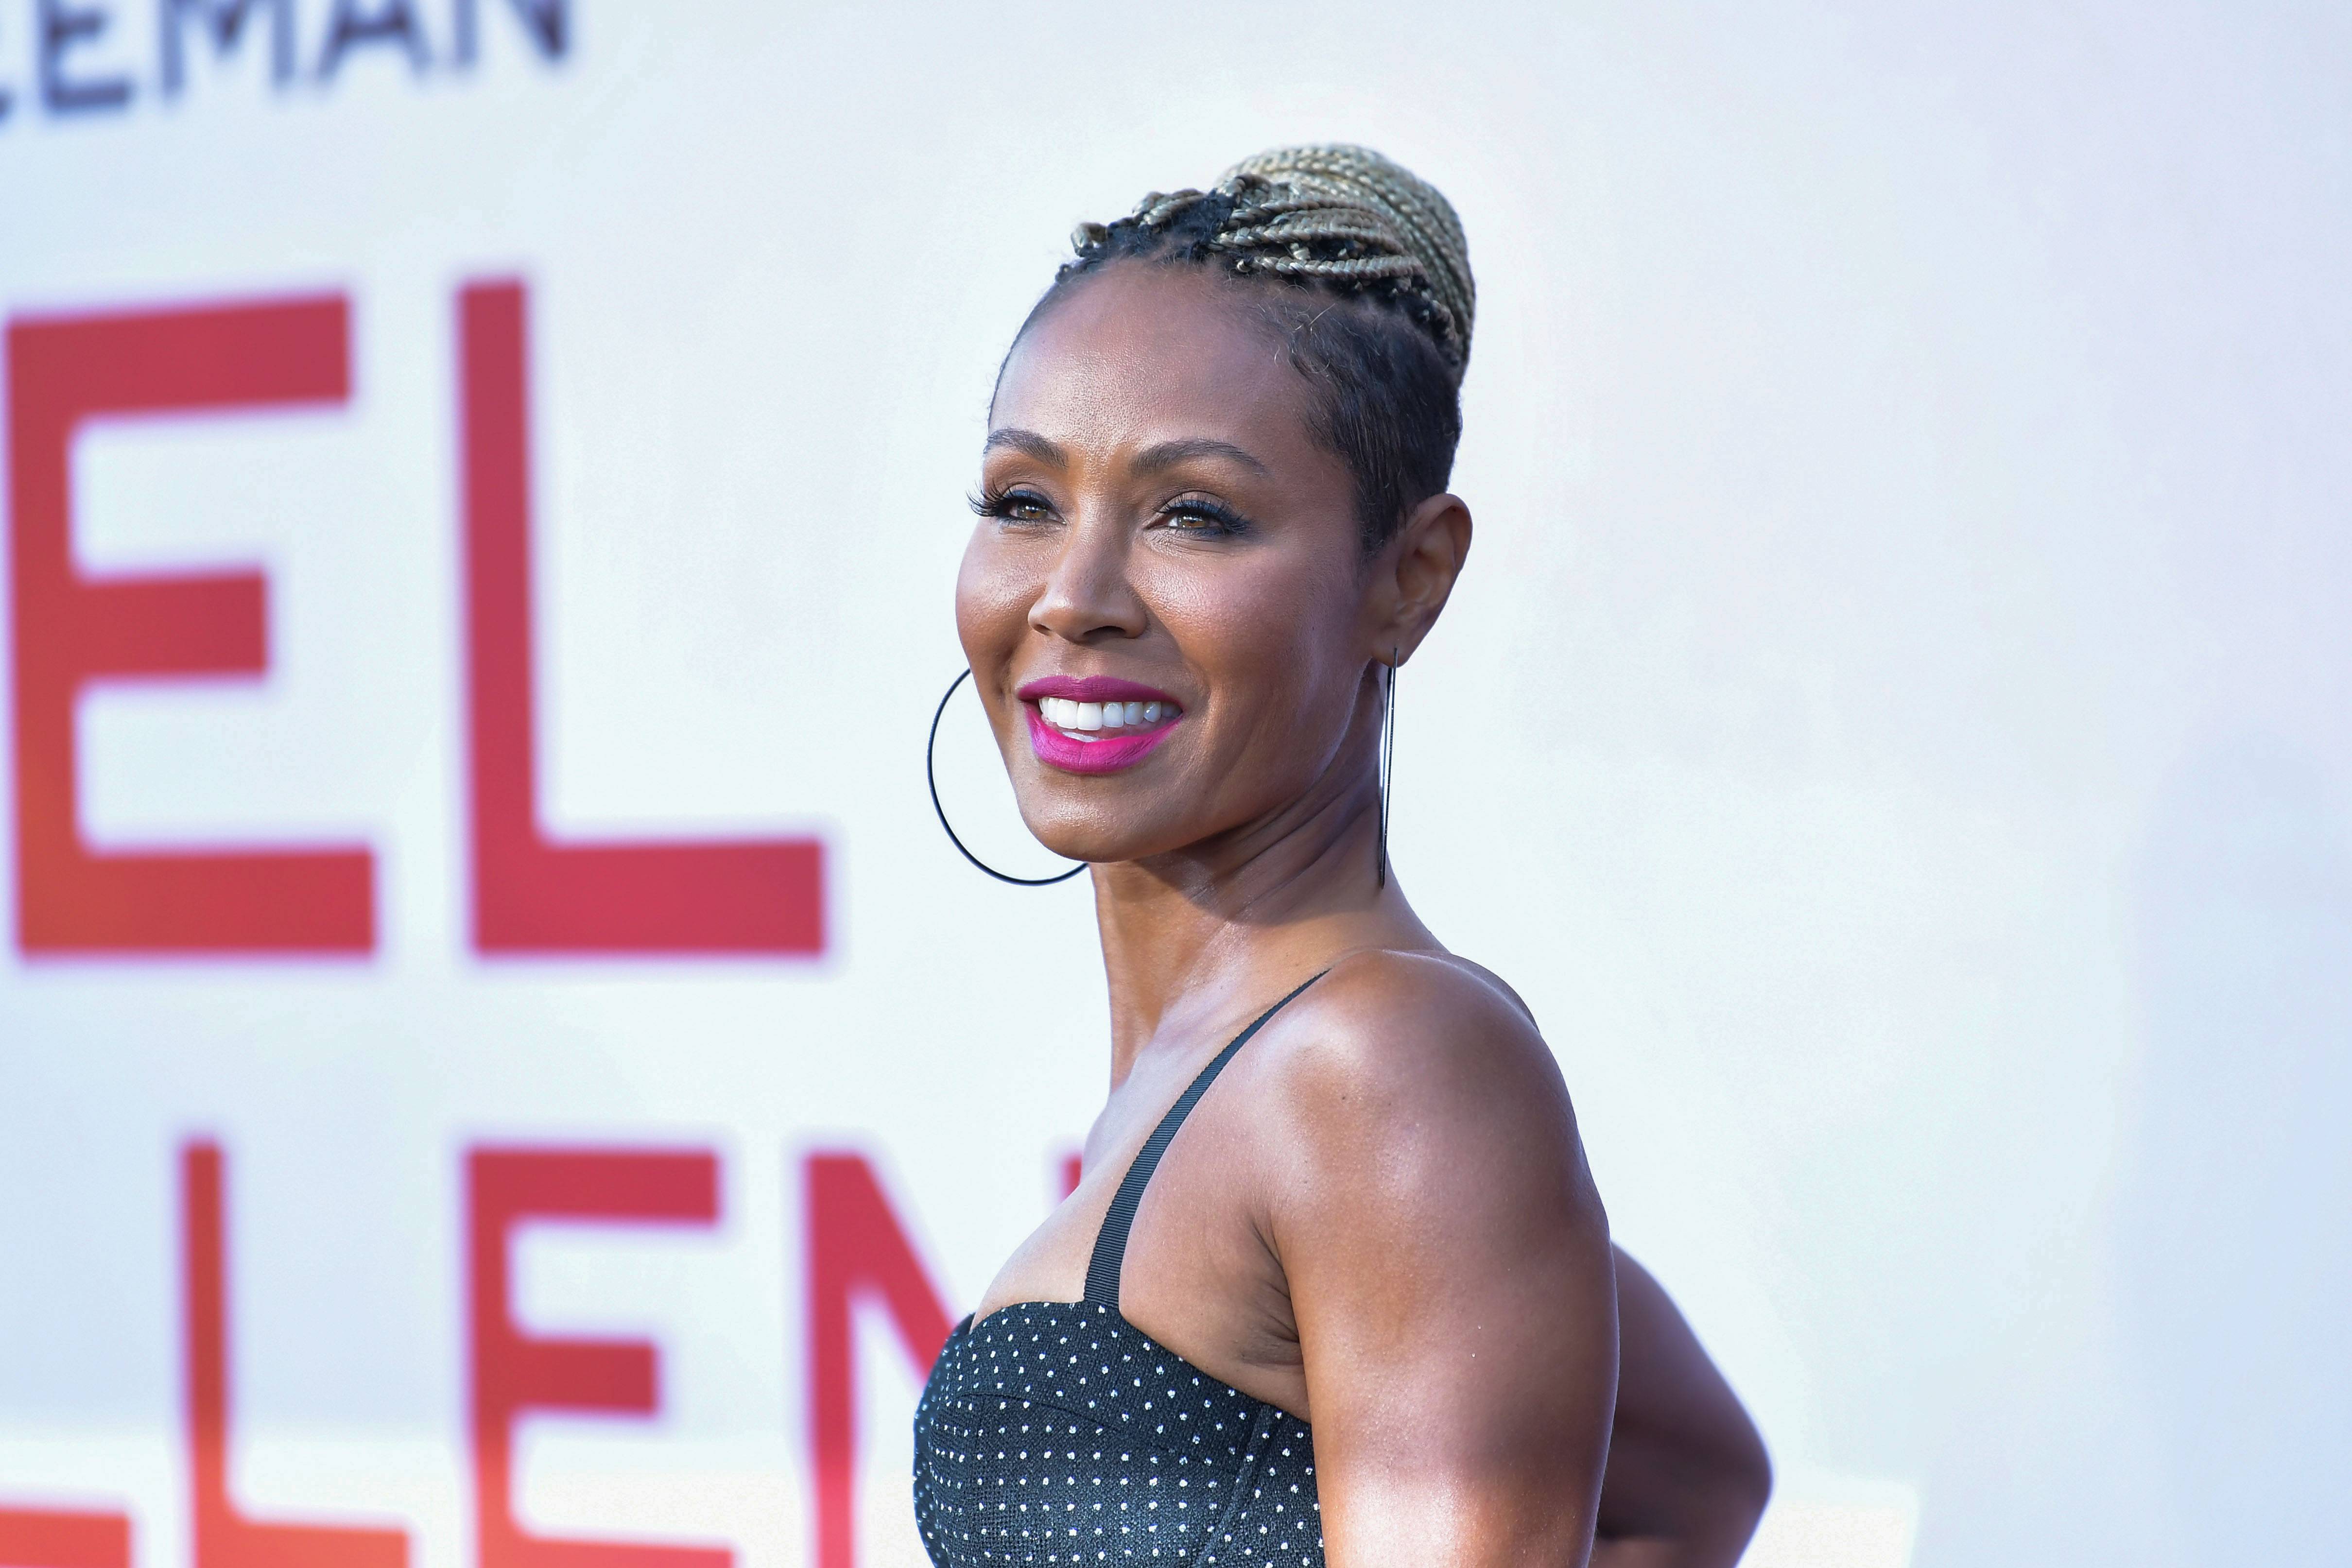 WESTWOOD, CALIFORNIA - AUGUST 20: Jada Pinkett Smith attends the LA Premiere of Lionsgate's "Angel Has Fallen" at Regency Village Theatre on August 20, 2019 in Westwood, California. (Photo by Amy Sussman/Getty Images)